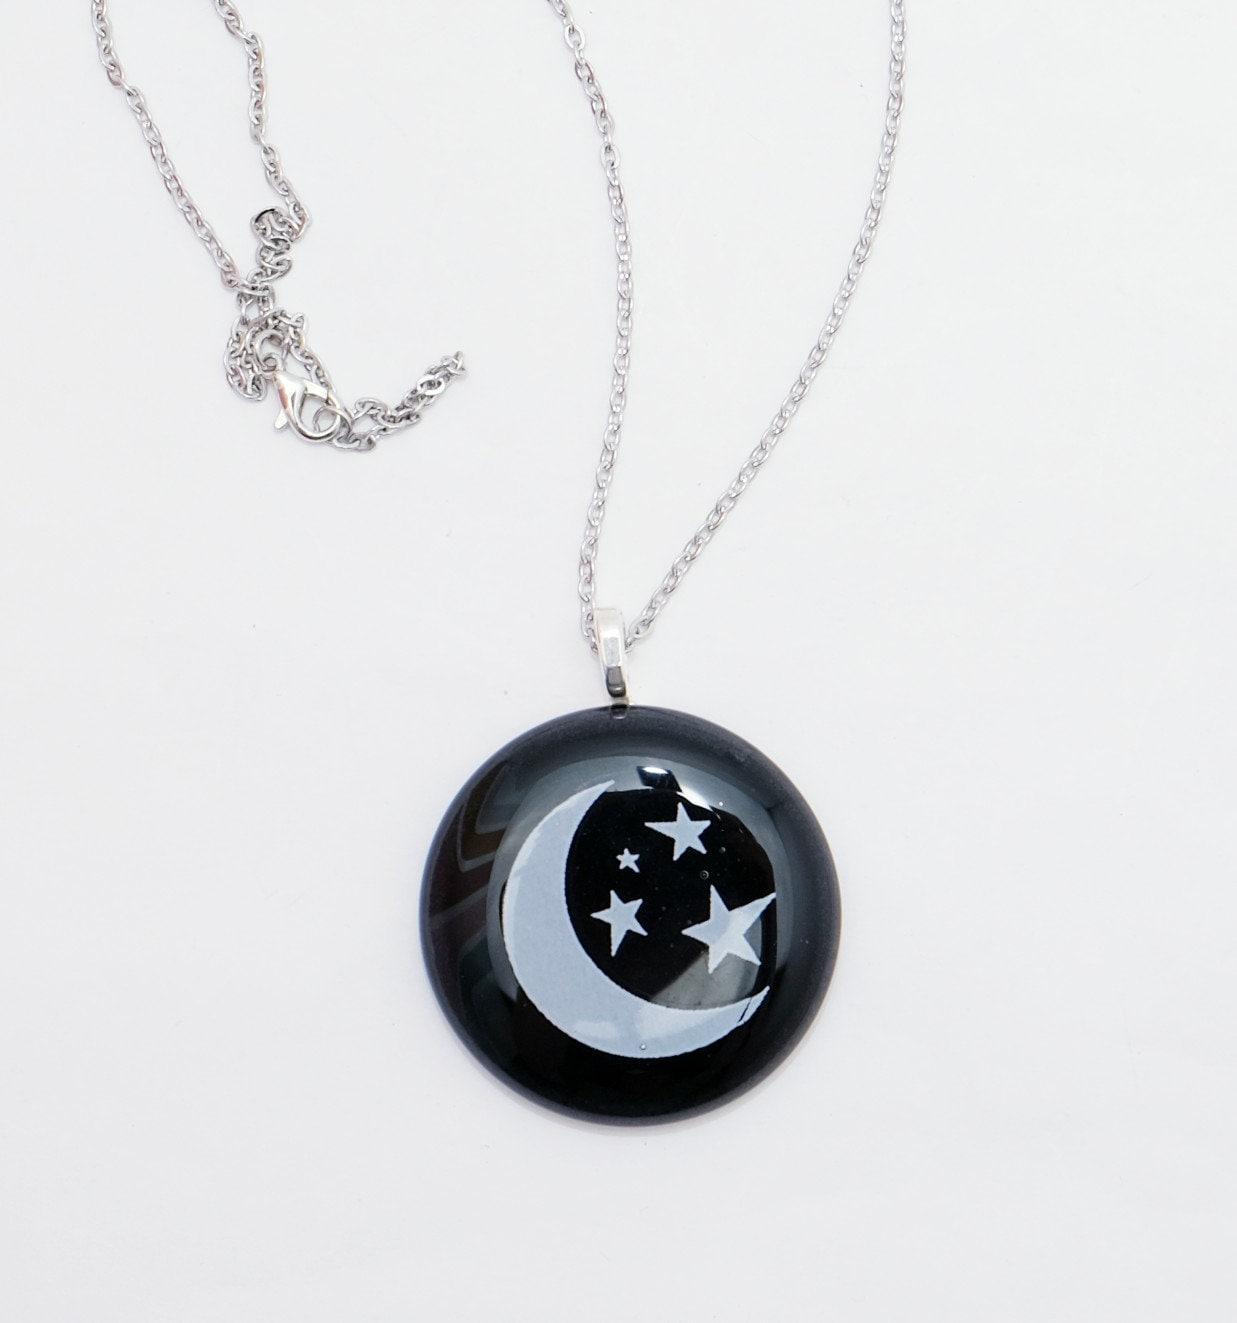 Celestial Chic: White Crescent Moon and Stars on Black Fused Glass Pendant necklace on 20 inch Steel Chain seeds glassworks seeds glassworks